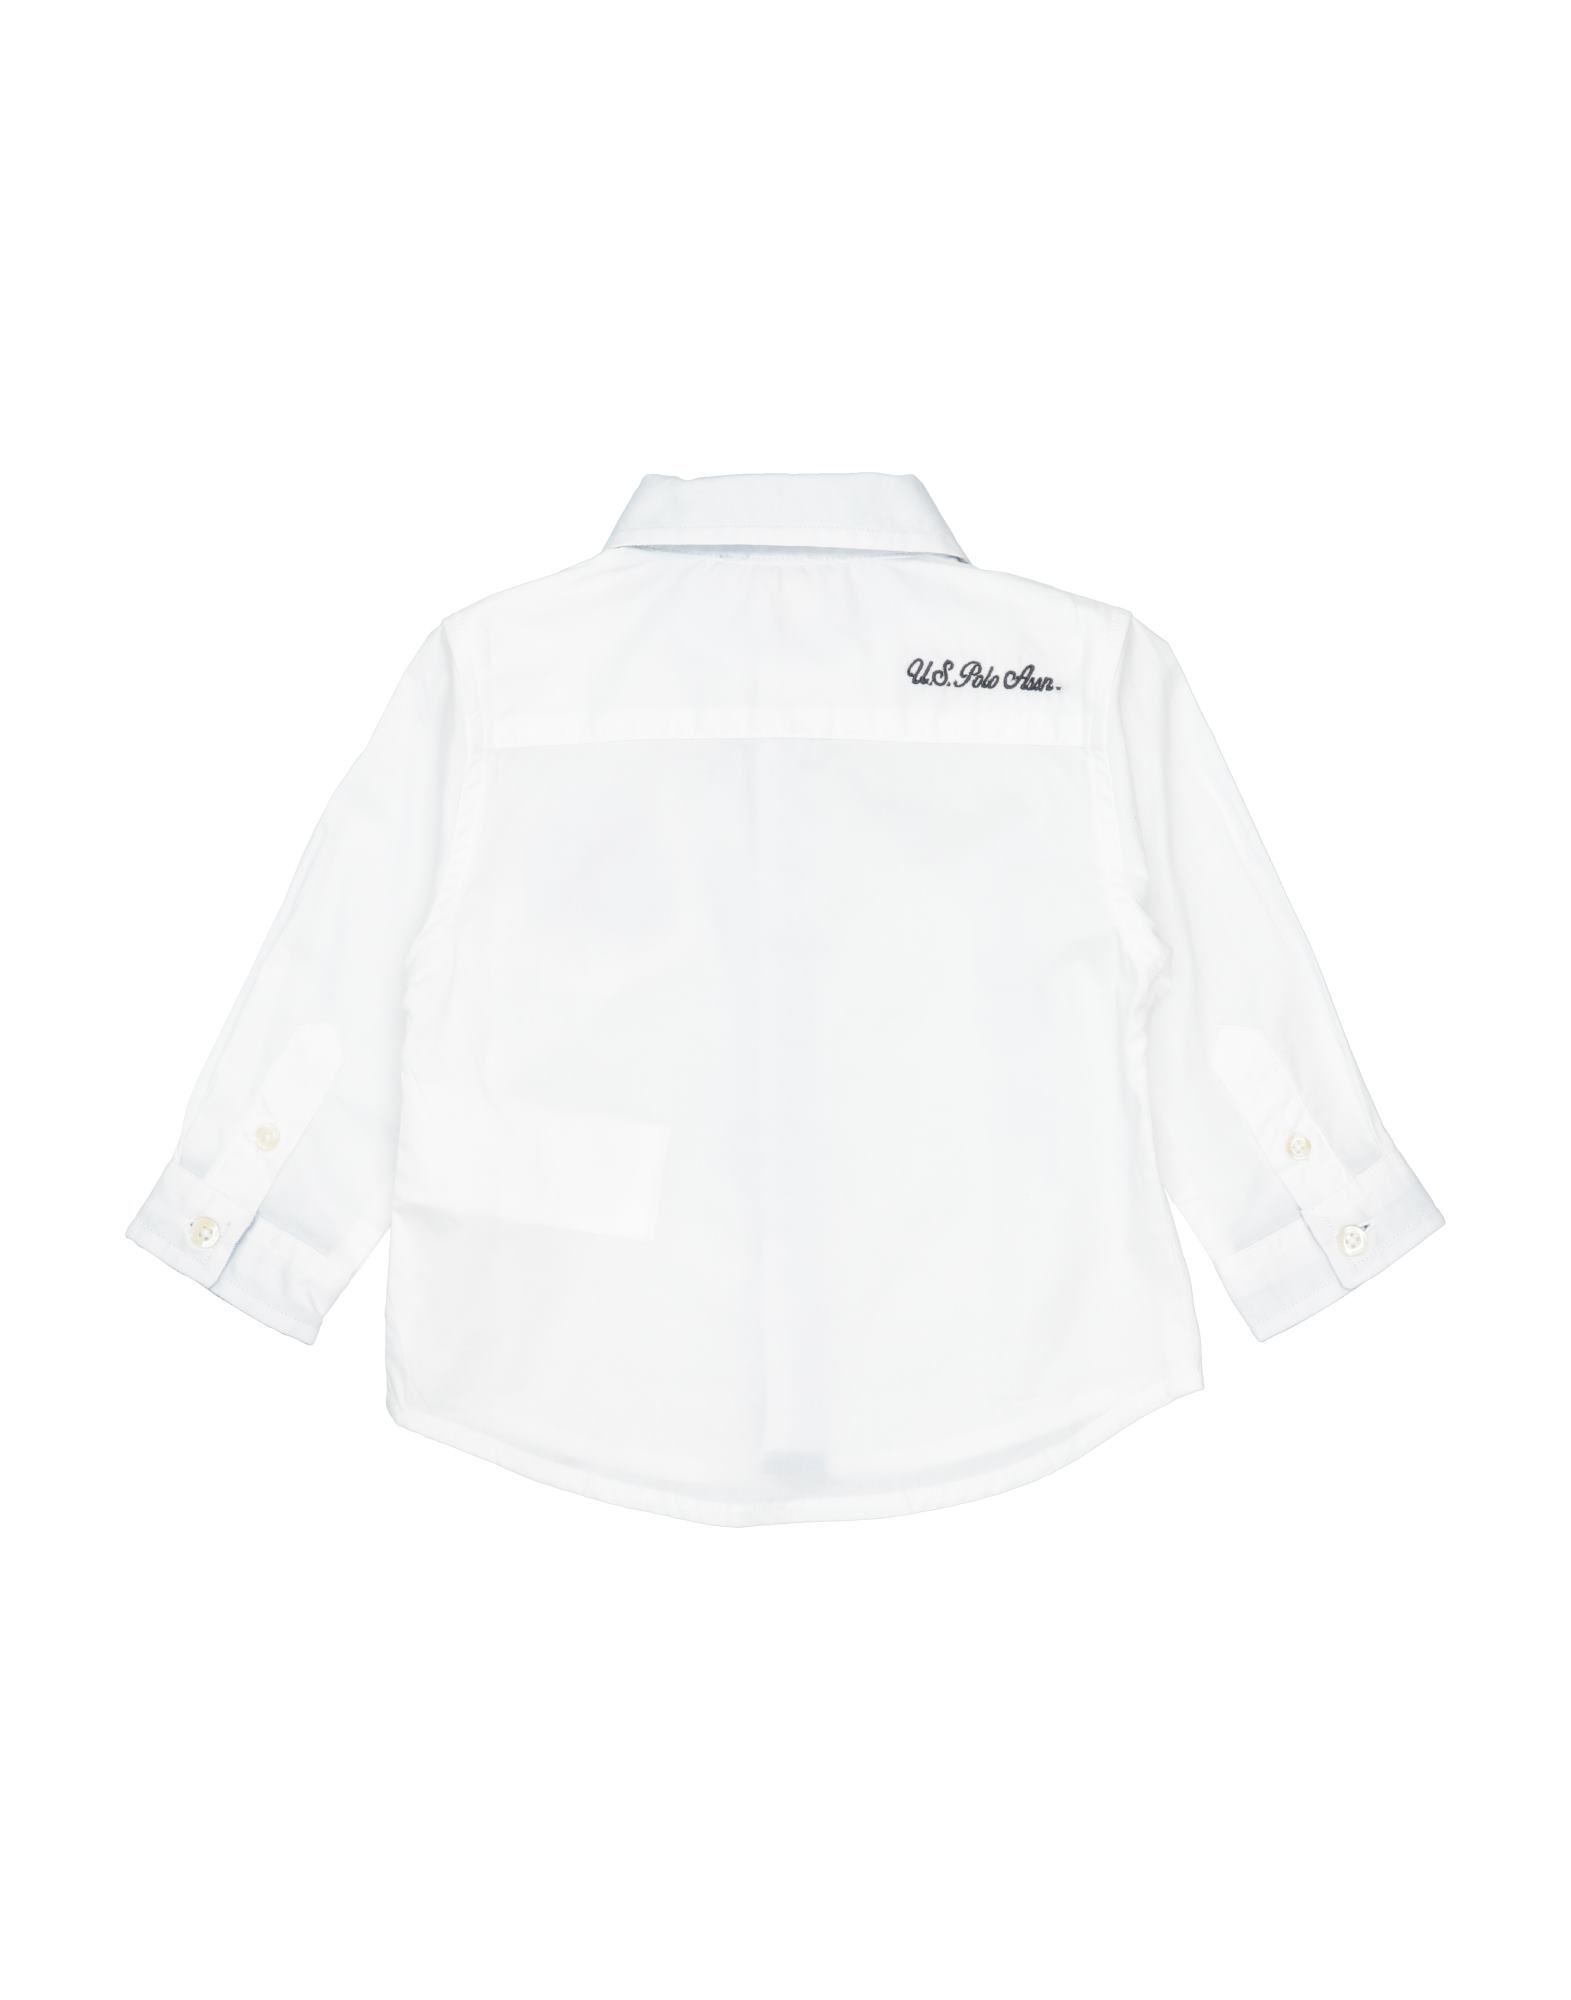 plain weave, embroidered detailing, logo, solid colour, front closure, long sleeves, button closing, buttoned cuffs, classic neckline, single chest pocket, wash at 30° c, do not dry clean, iron at 110° c max, do not bleach, do not tumble dry, stretch